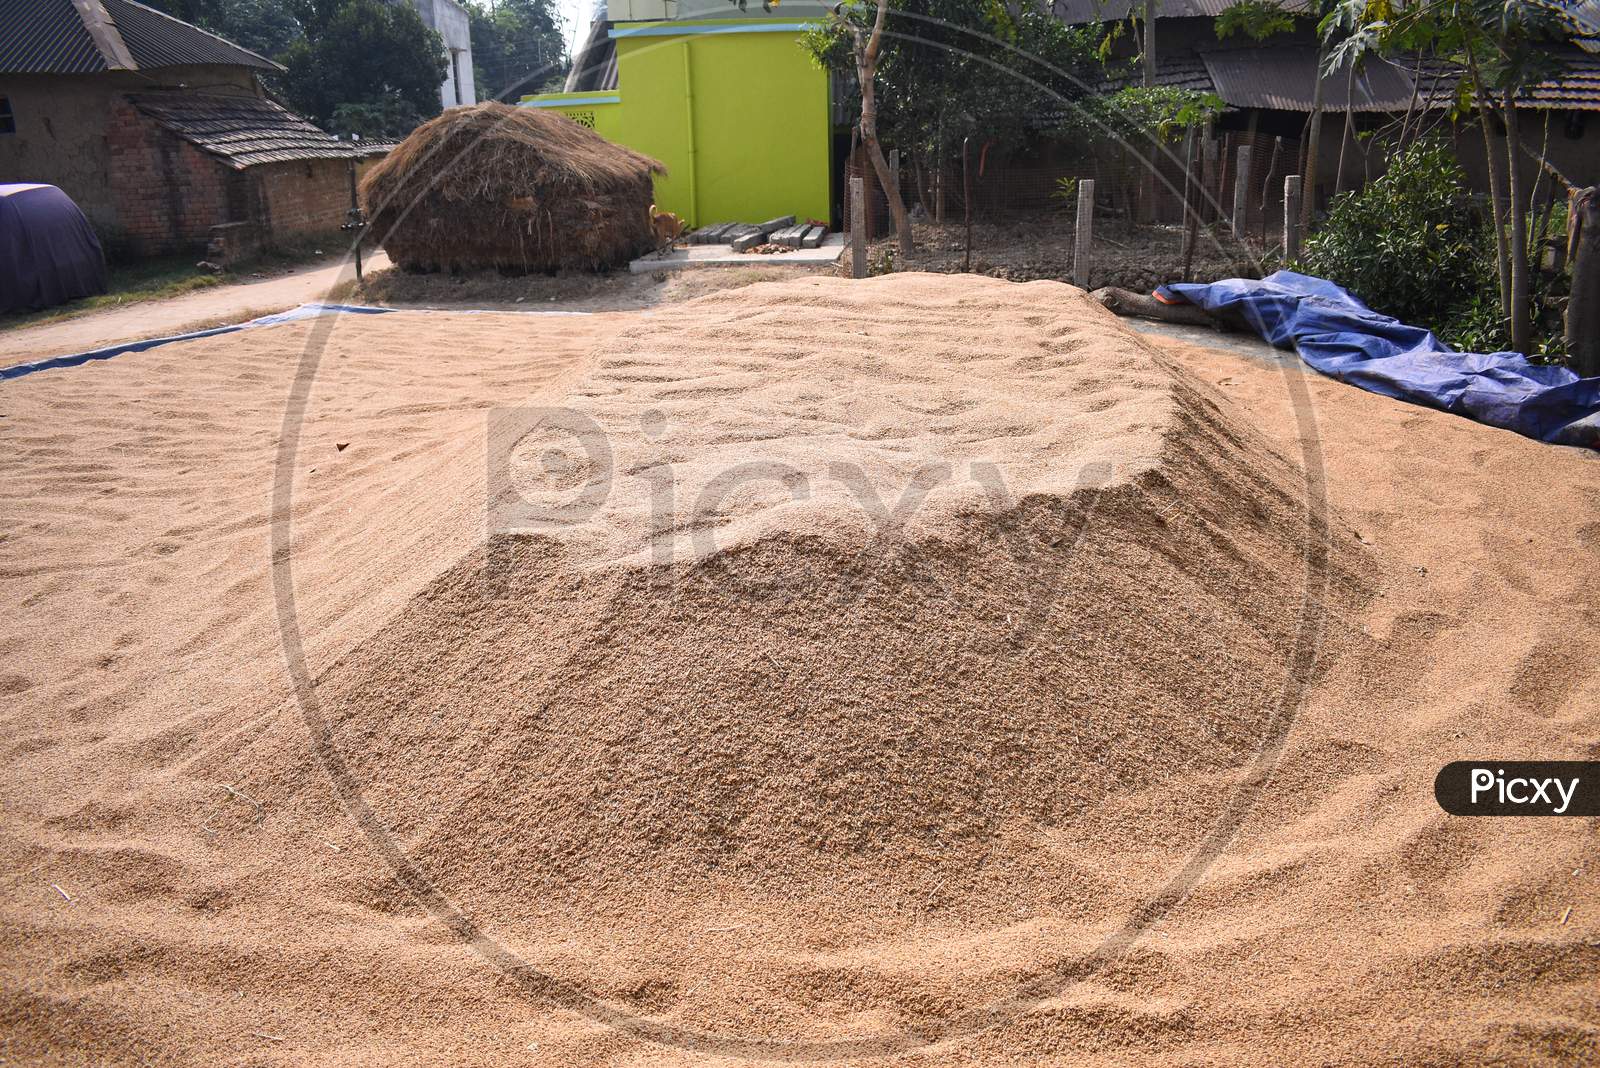 Rice Seeds Spread In The Ground Under The Open Sky To Dry Before Storing